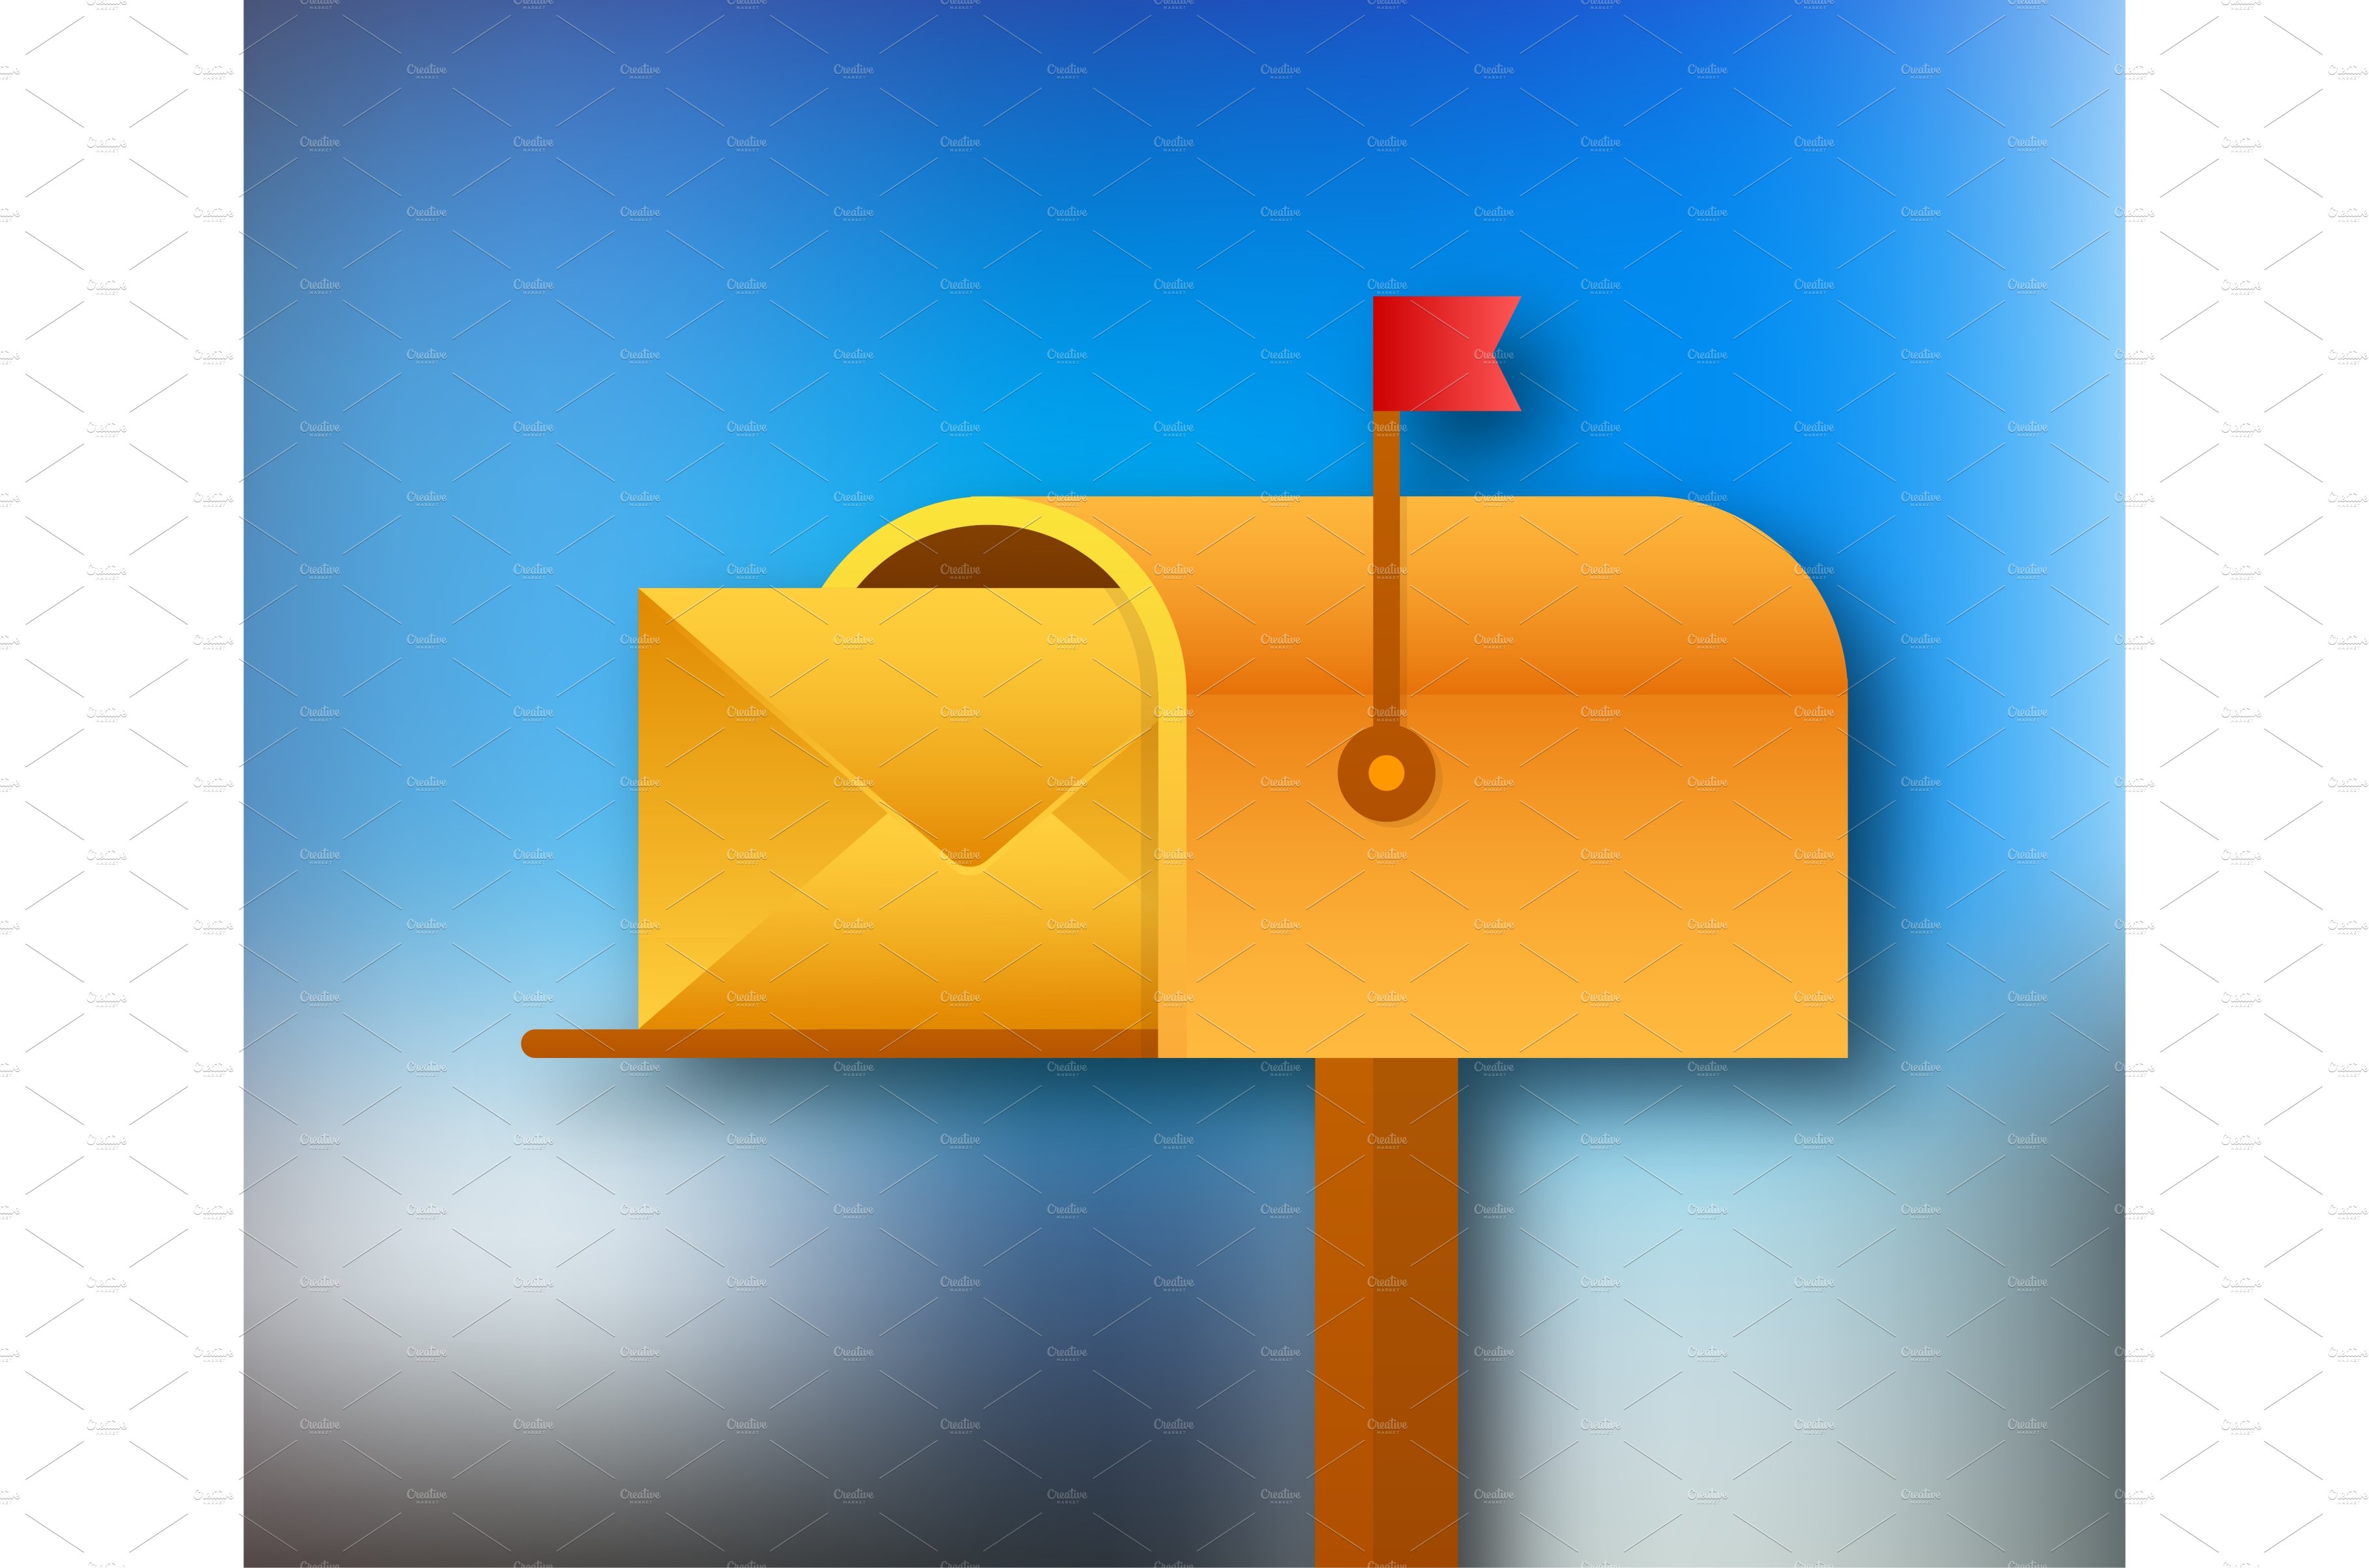 Mail box vector illustration in the cover image.